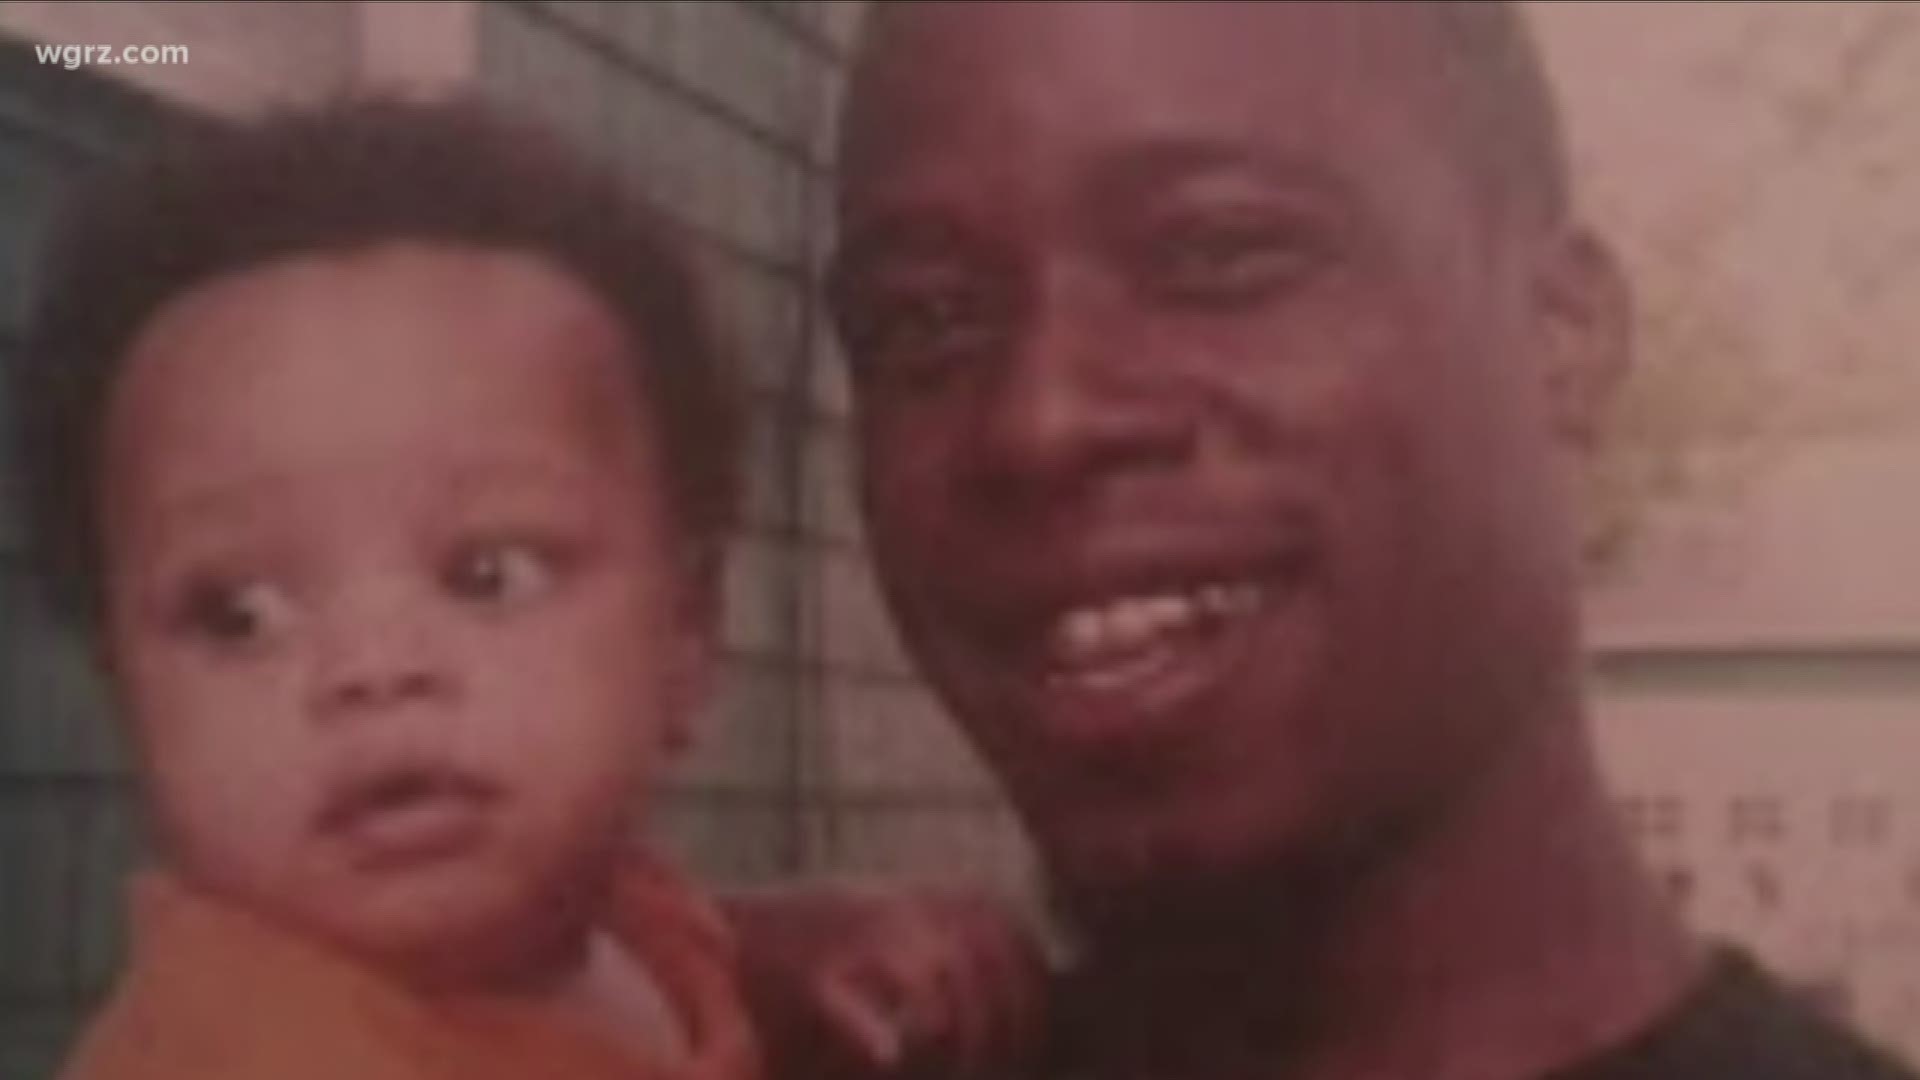 In the city of Buffalo in 2013, a 21 year-old man was murdered, leaving four children behind.